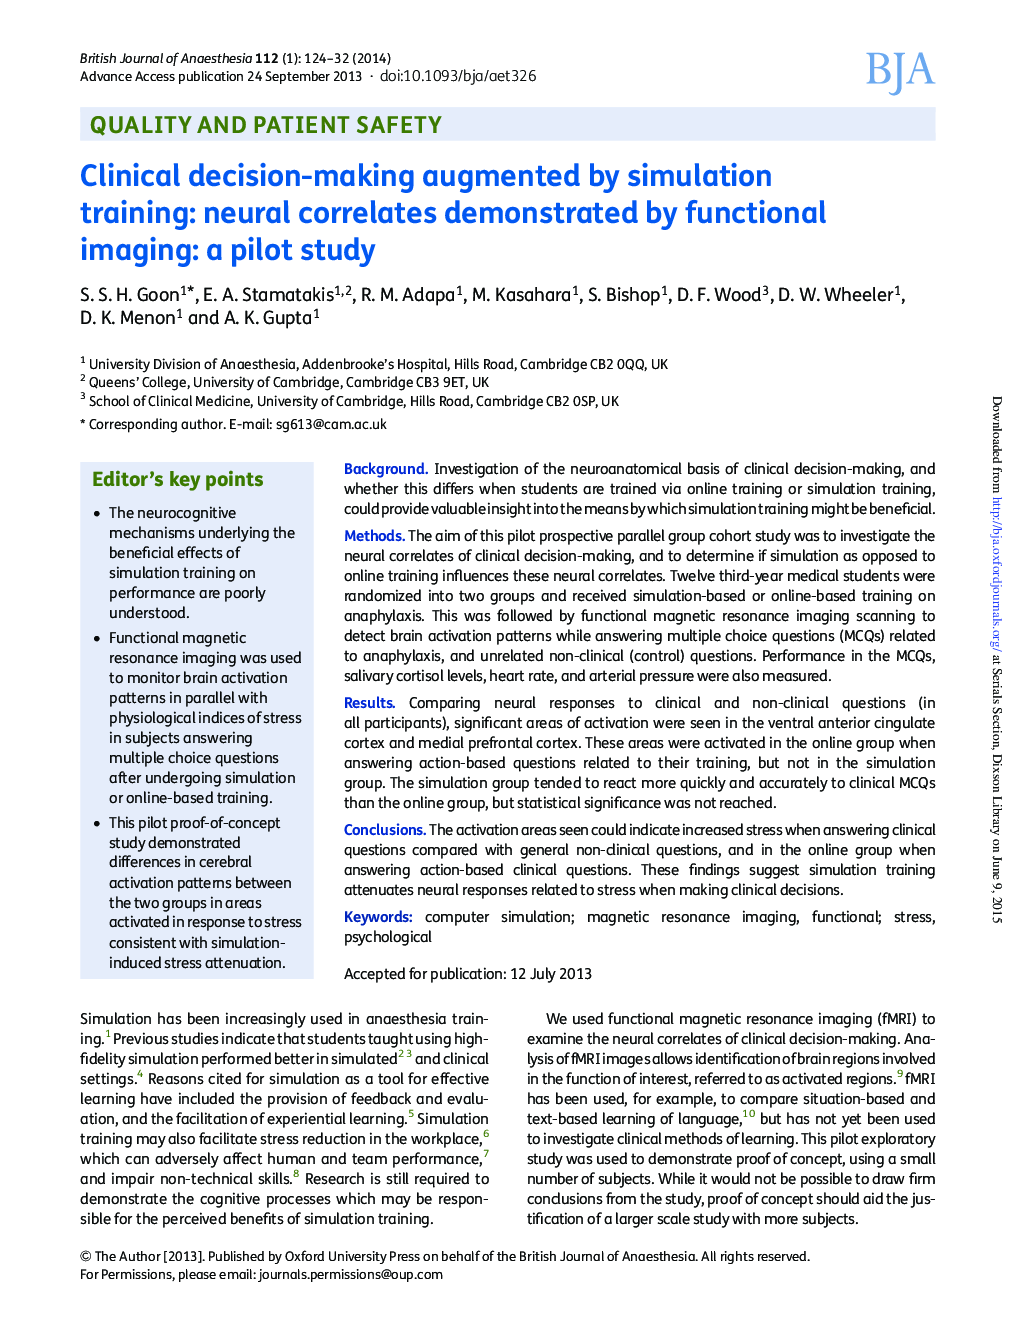 Clinical decision-making augmented by simulation training: neural correlates demonstrated by functional imaging: a pilot study